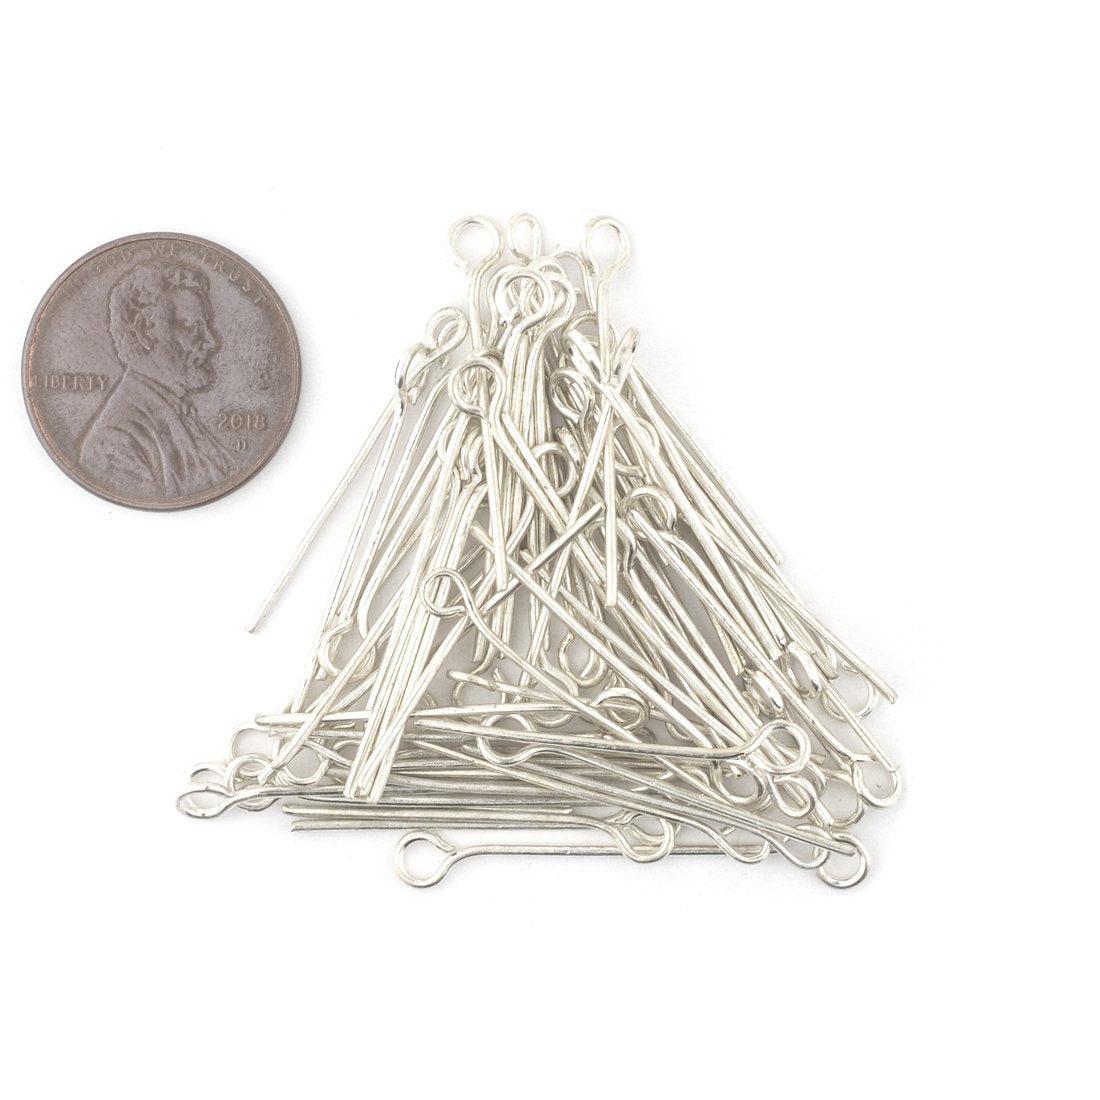 TheBeadChest Silver 21 Gauge 1 Inch Eye Pins (Approx 100 pieces)